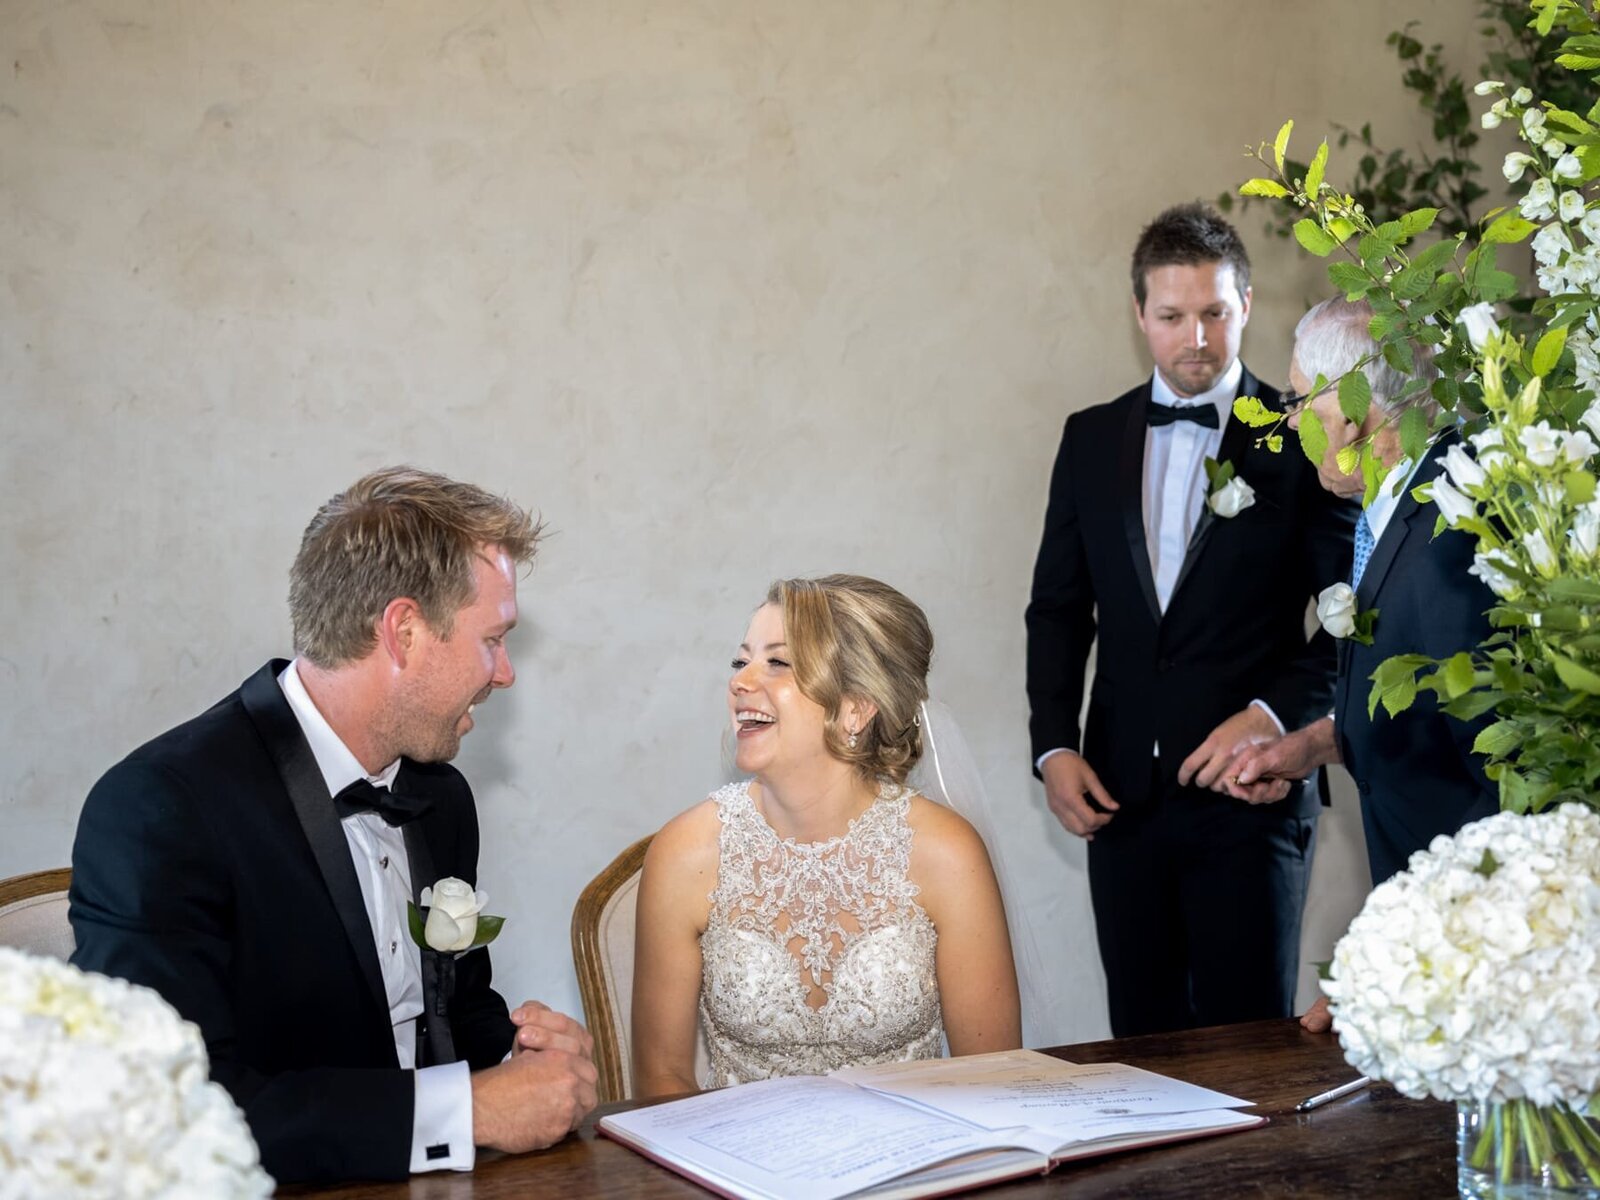 Stones of the Yarra Valley wedding - Serenity Photography 61